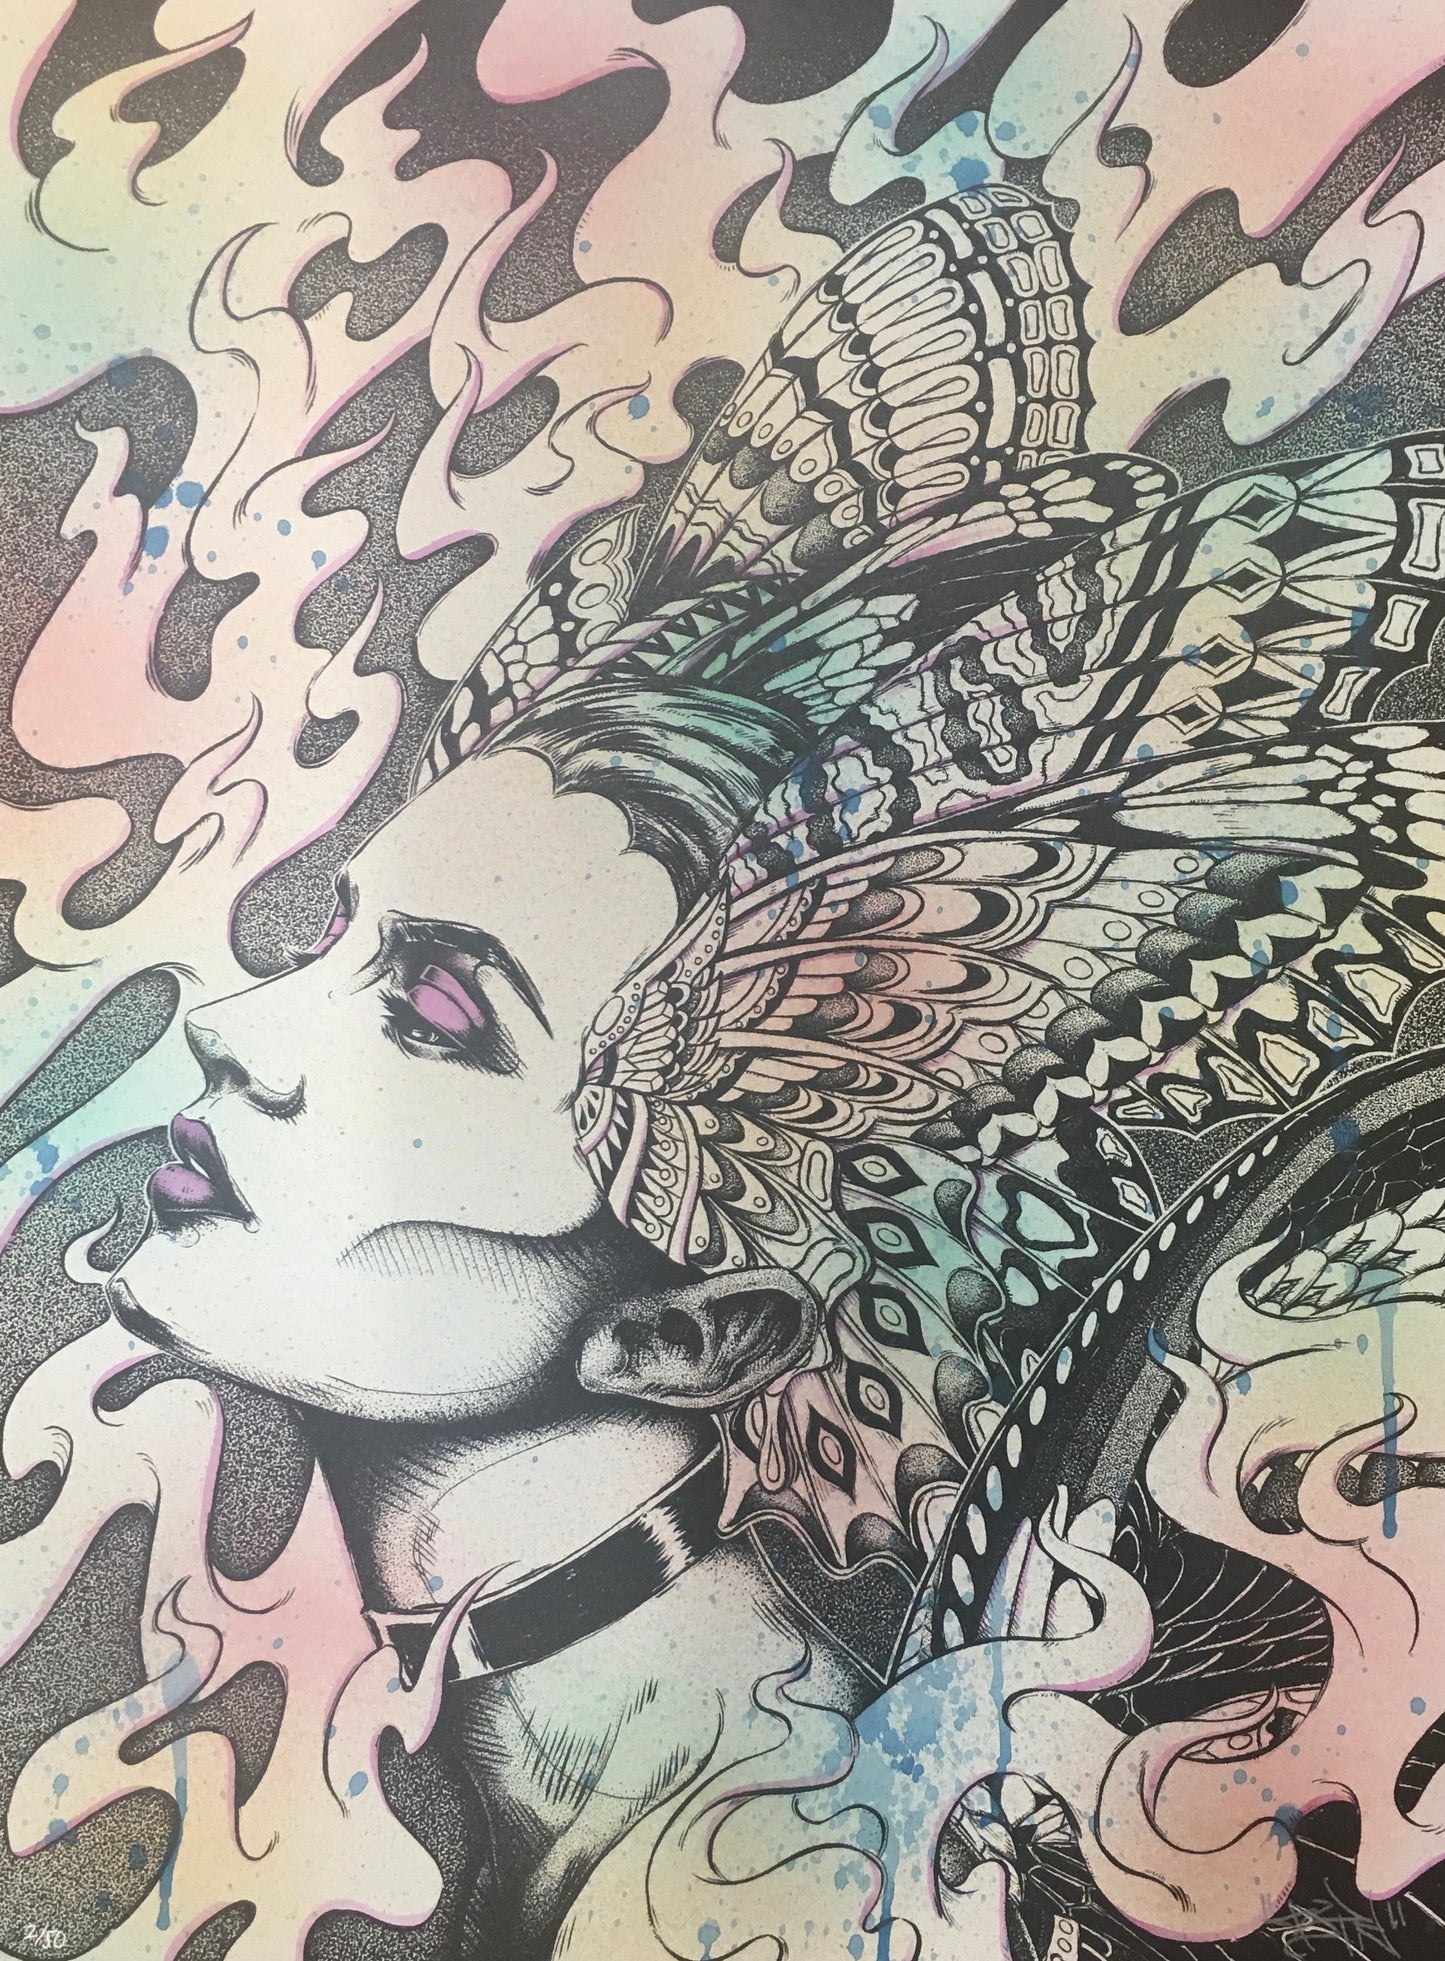 Bioworkz "Butterfly" Hand-Embellished Edition